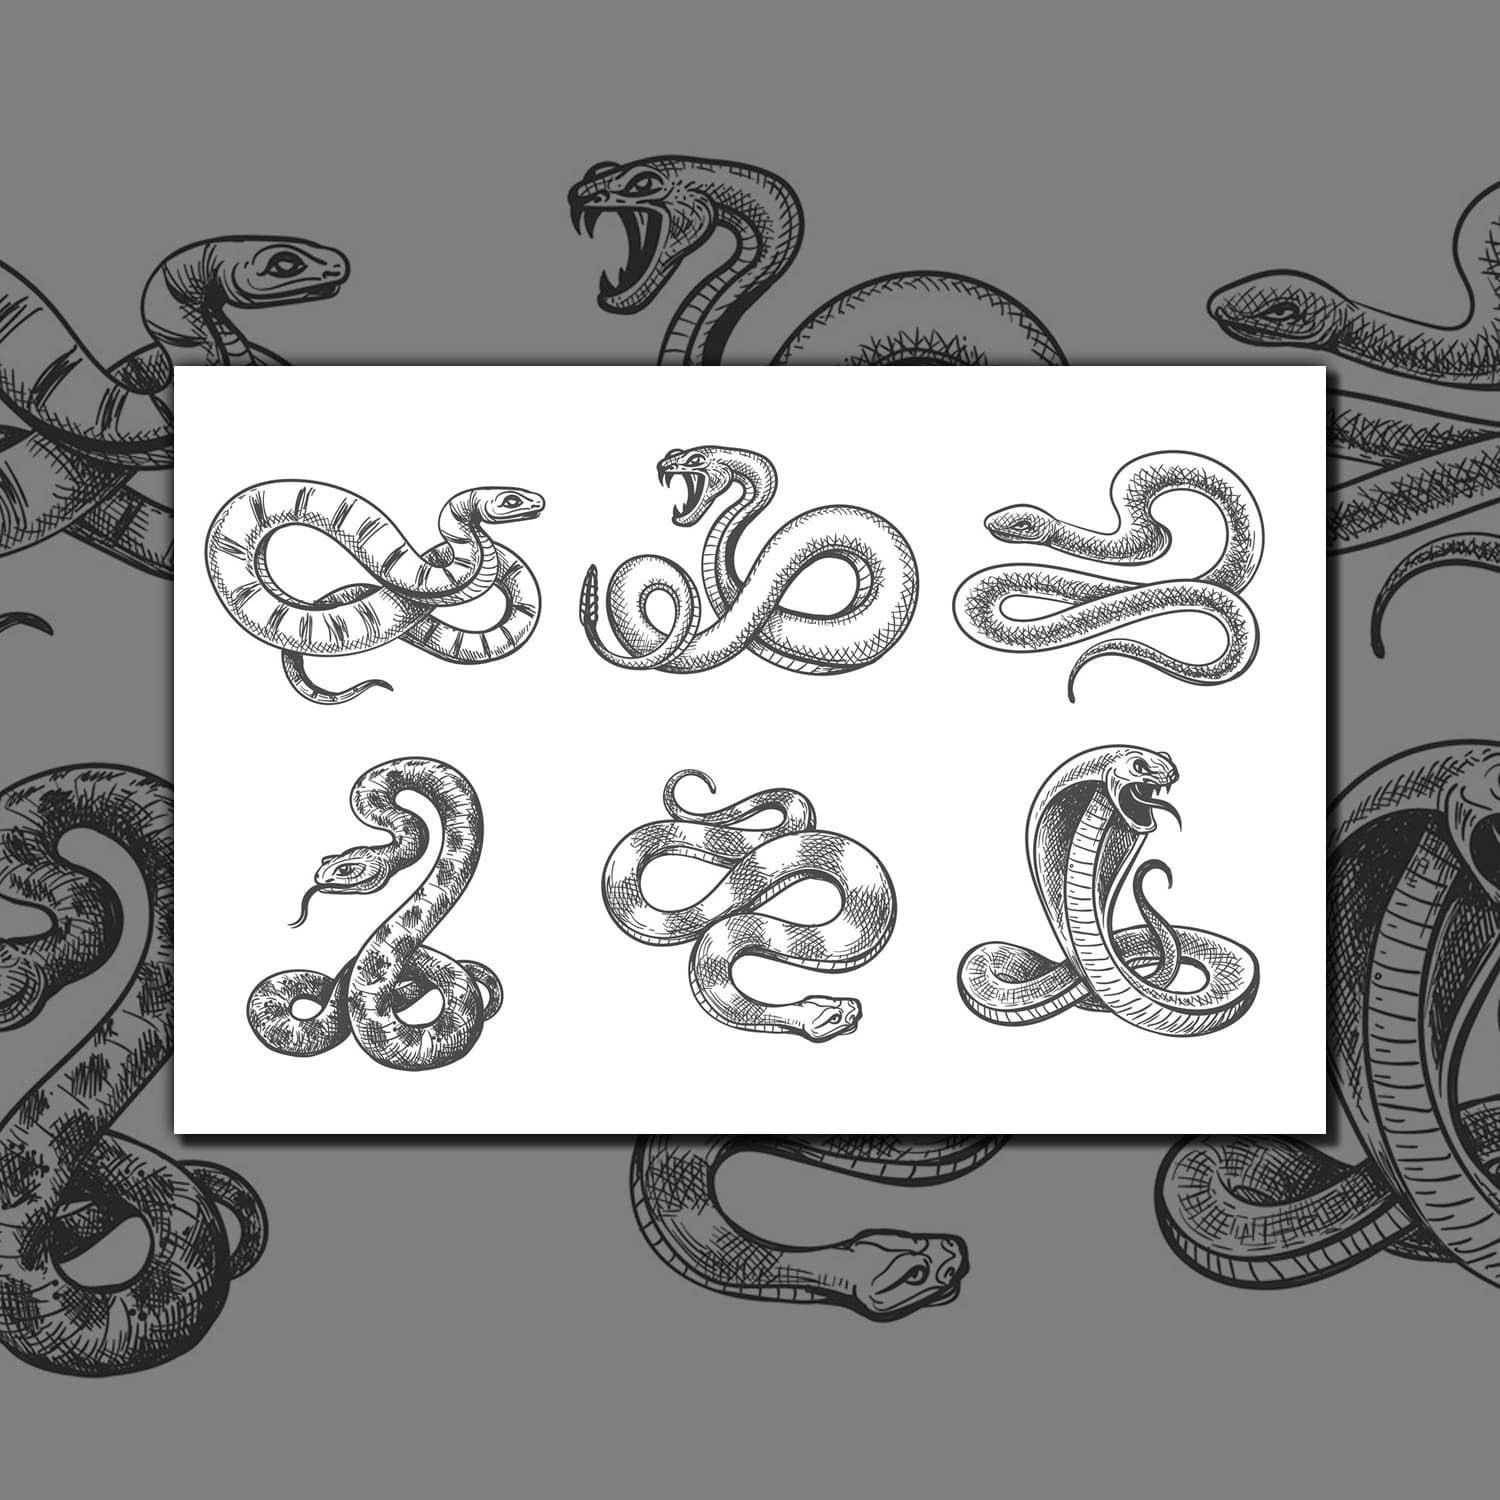 Collection of hand-drawn images of wild snakes.